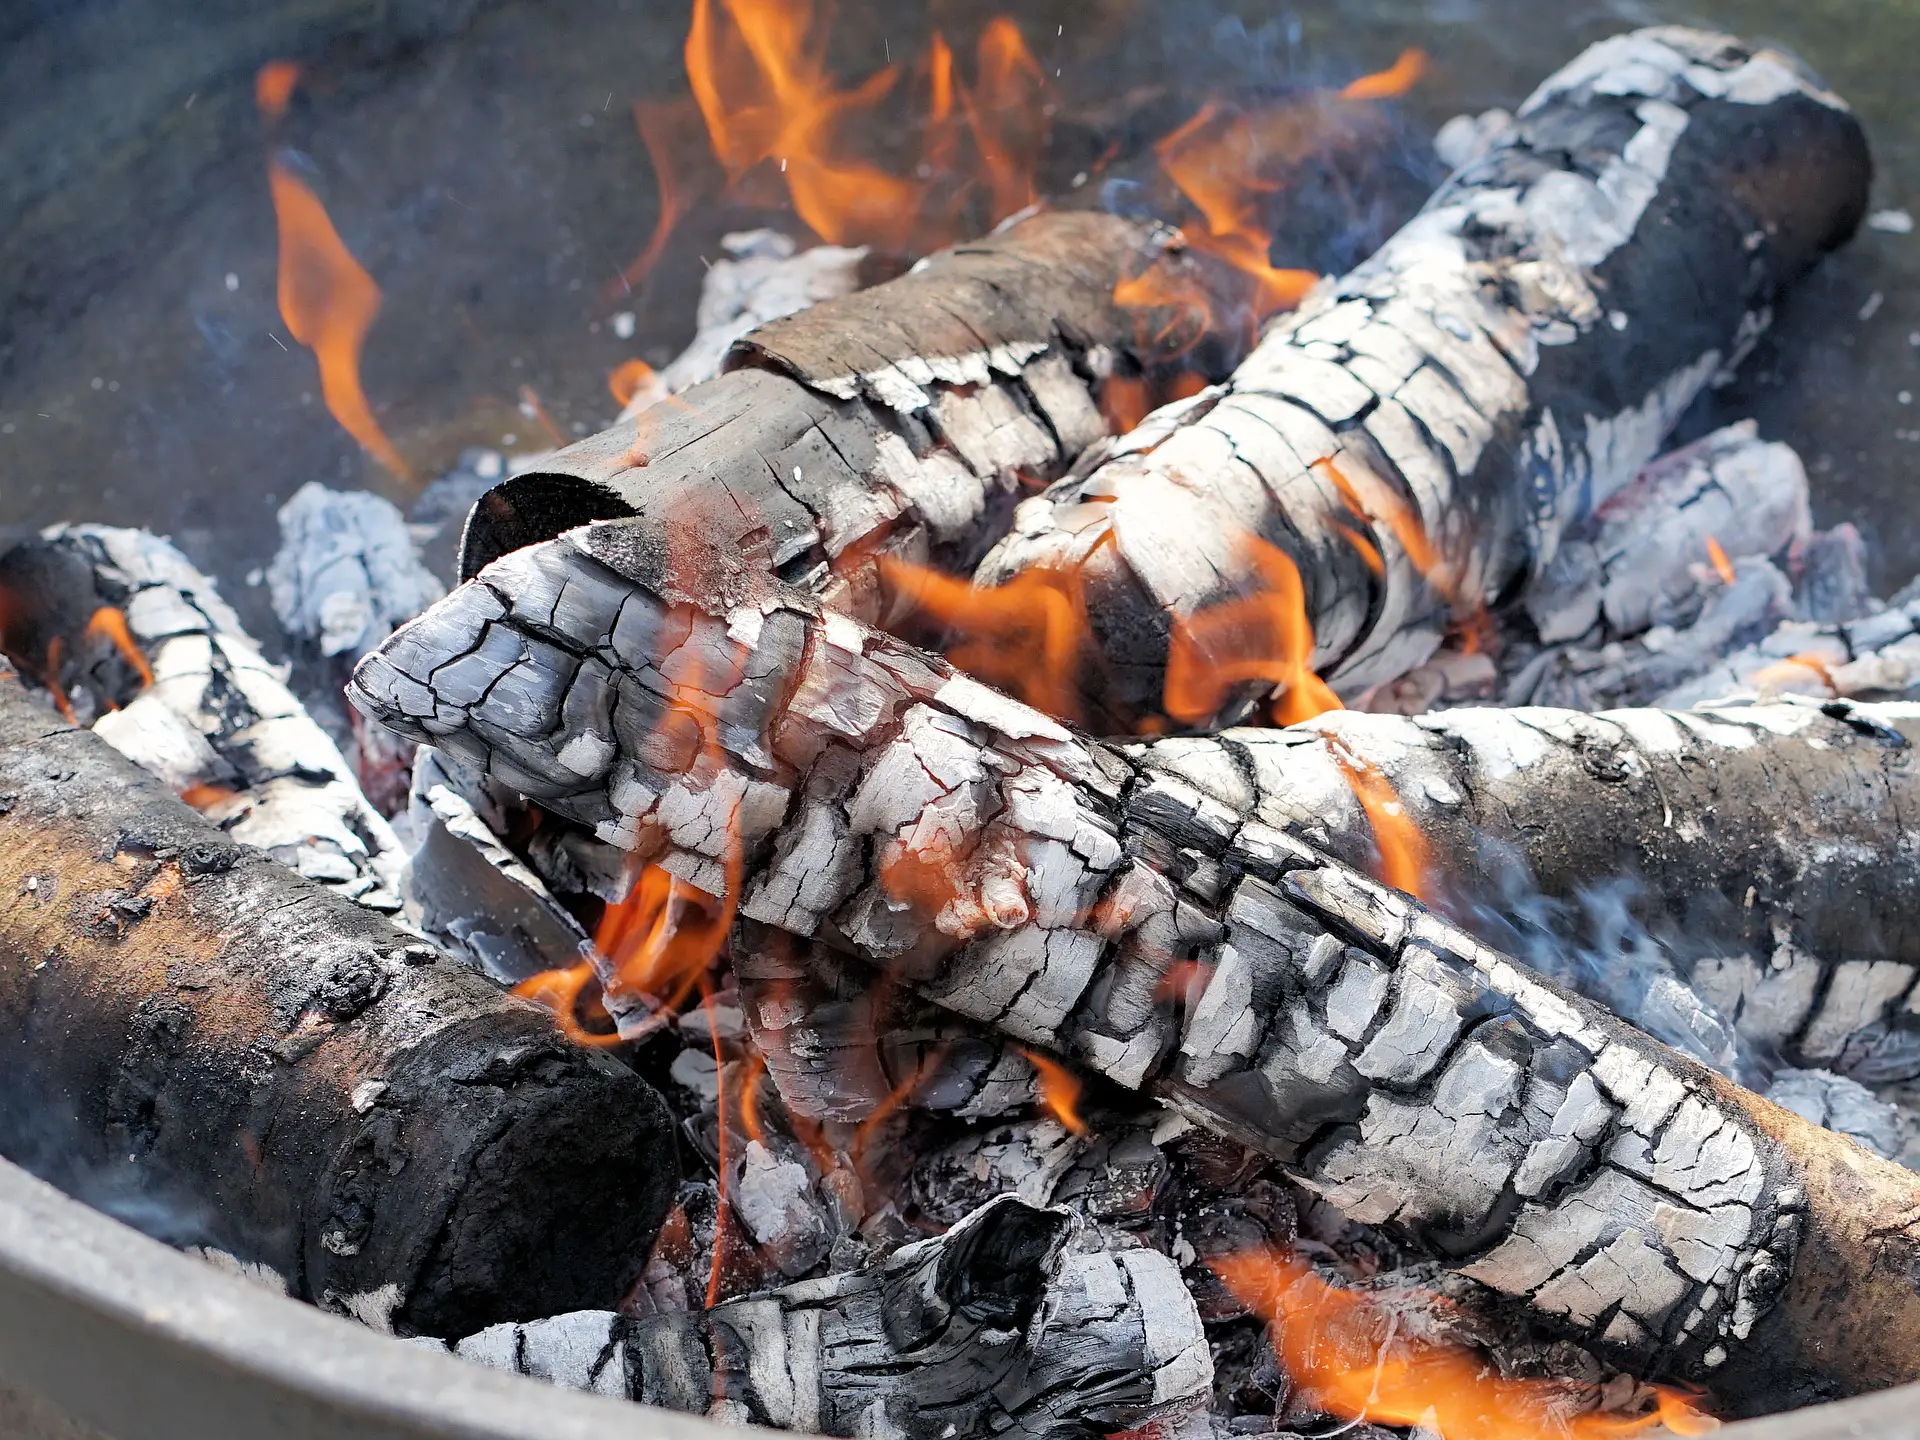 How To Start A Wood Burning Fire Pit, Fire Pit Wood Charcoal Burning